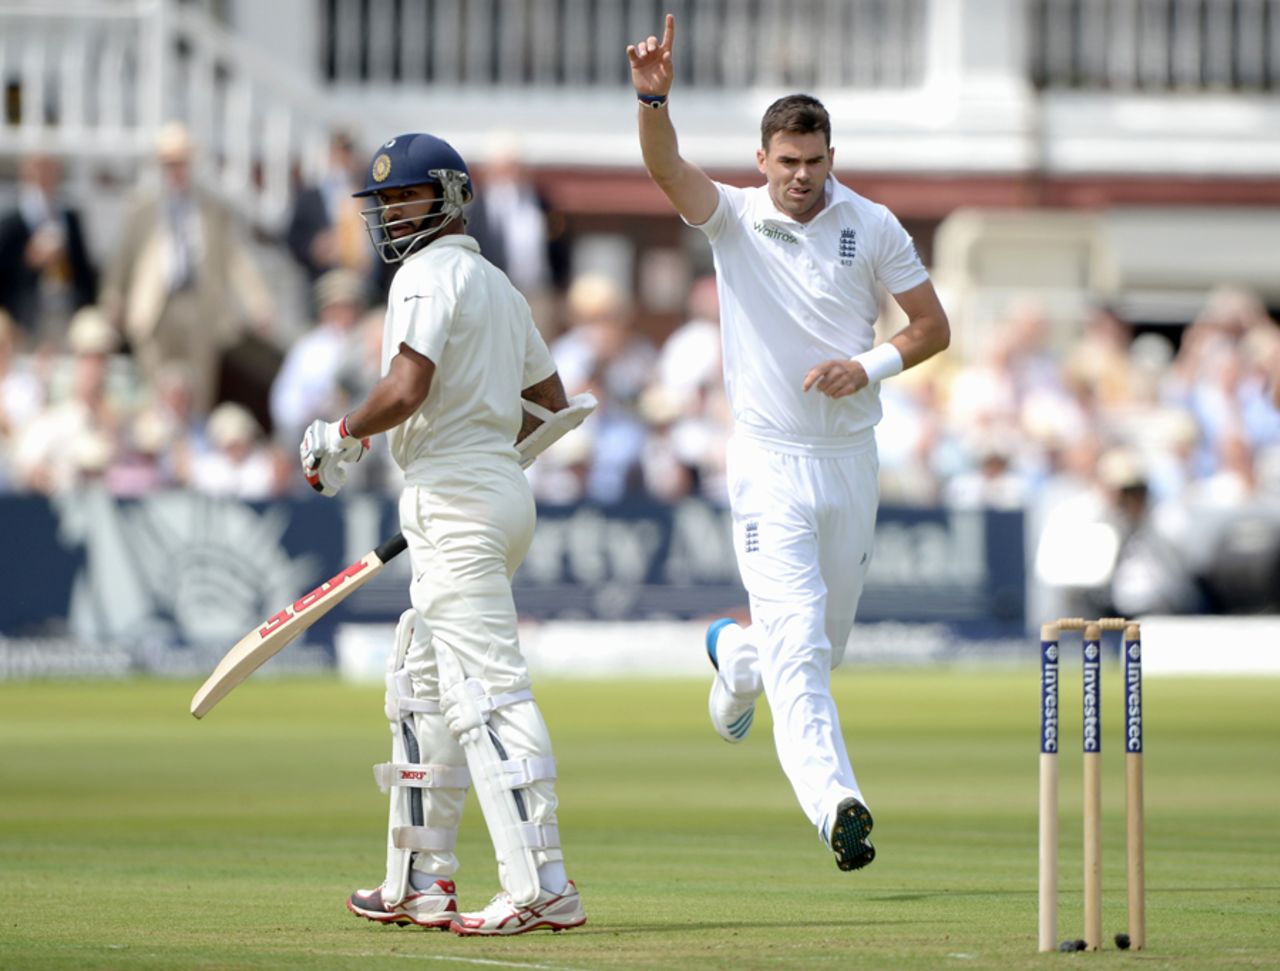 James Anderson had Shikhar Dhawan edging cheaply to slip, England v India, 2nd Investec Test, Lord's, 1st day, July 17, 2014